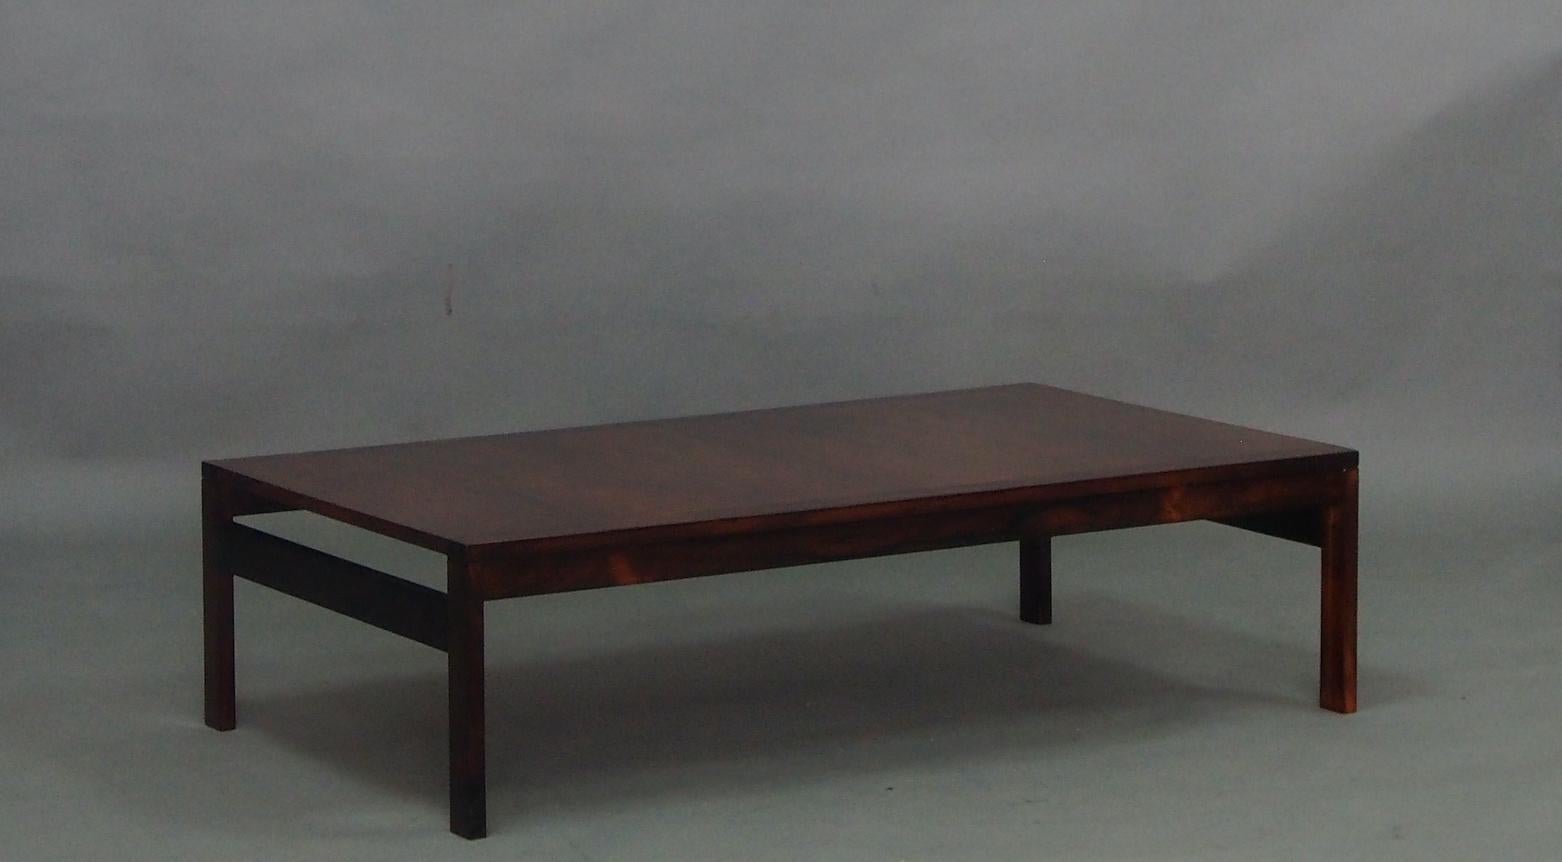 Ole Gjerløv-Knudsen & Torben Lind for France & Søn Rosewood Low Coffee Table.
Fully restored piece, hand-made varnished by our own team of craftsmen.